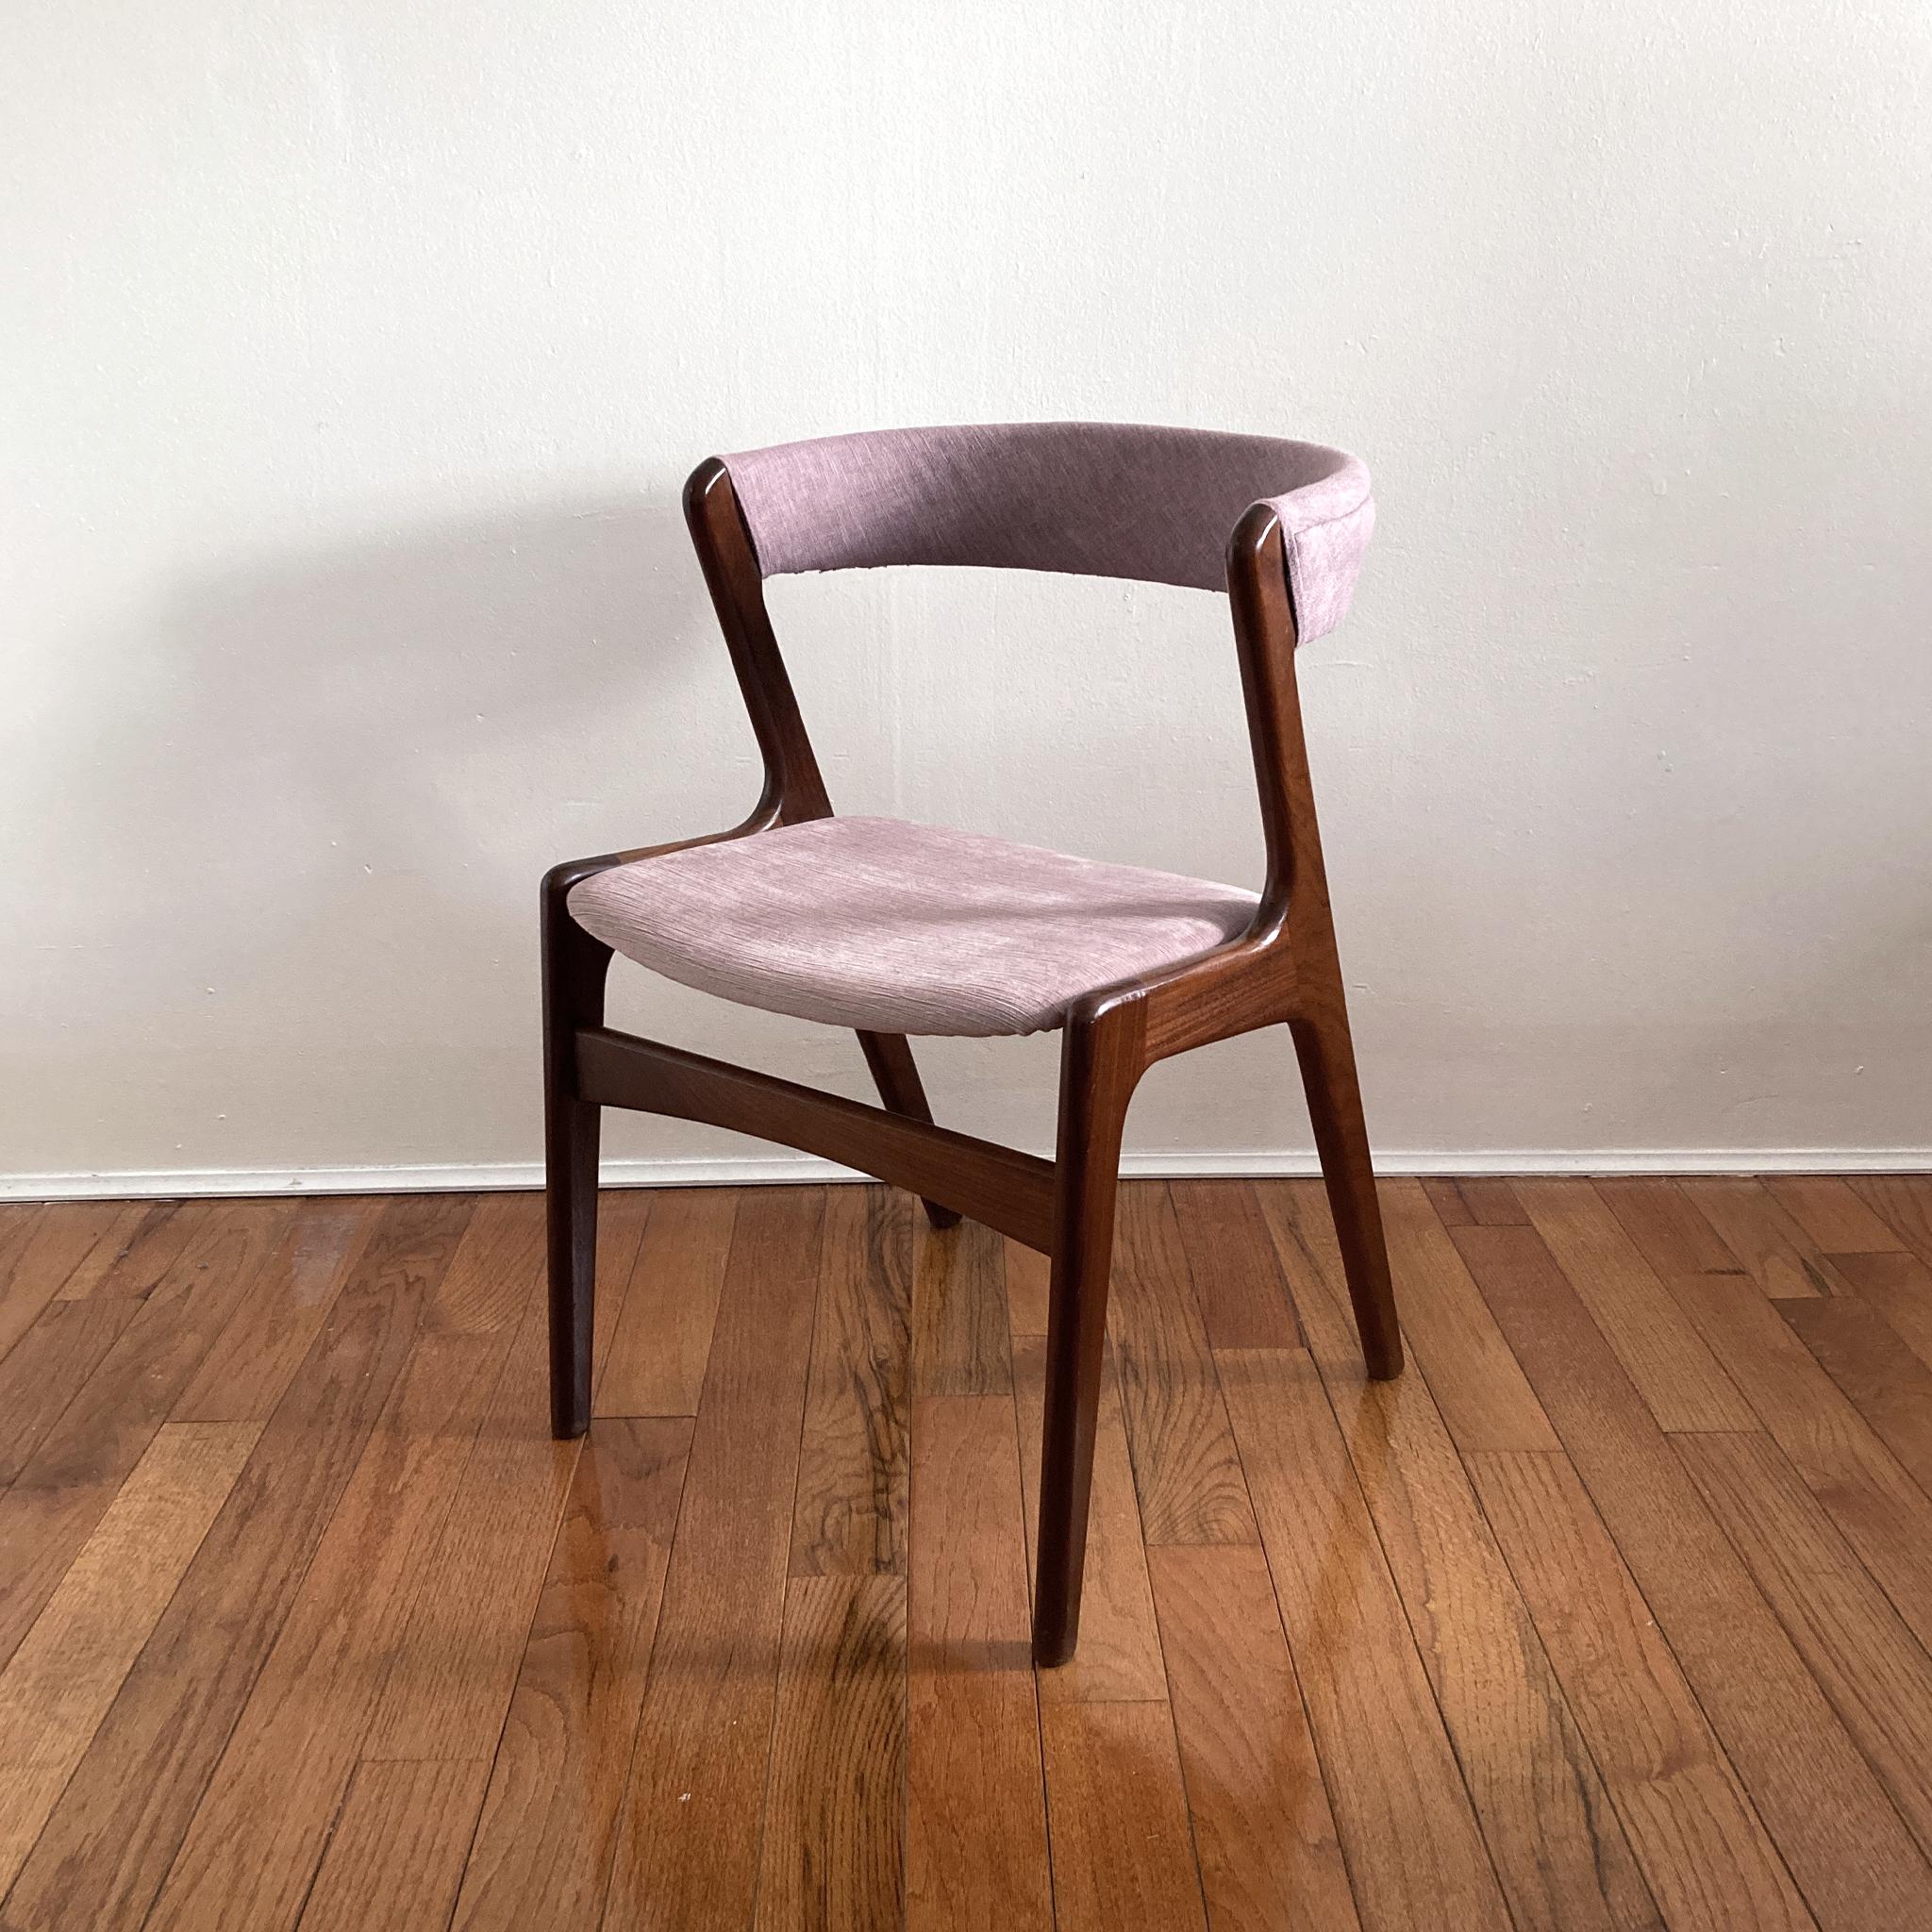 Kai Kristiansen Mauve Pink Curved Back Chair, 1960s For Sale 1